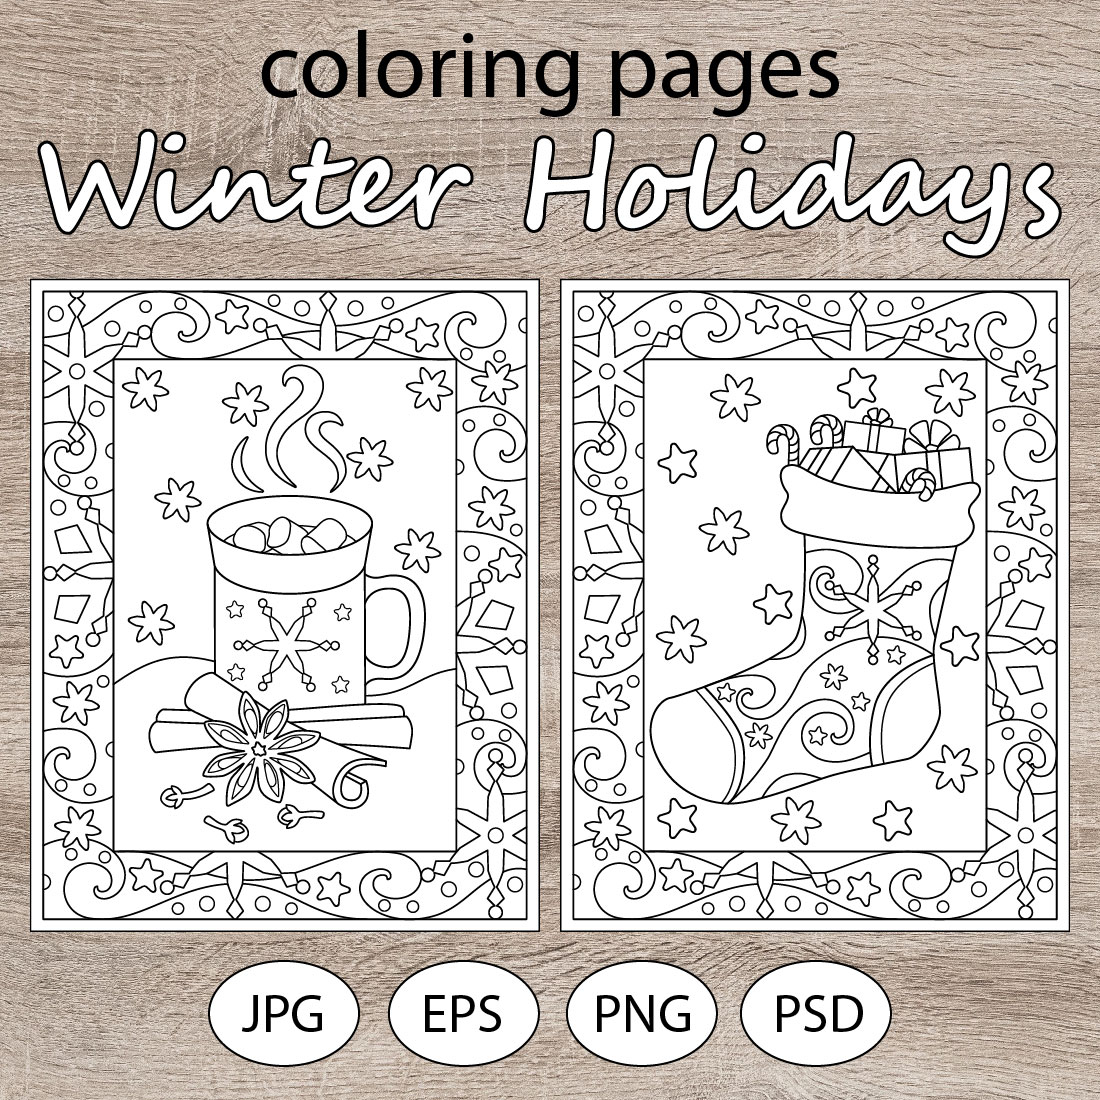 Winter Holidays - 5 coloring pages cover image.